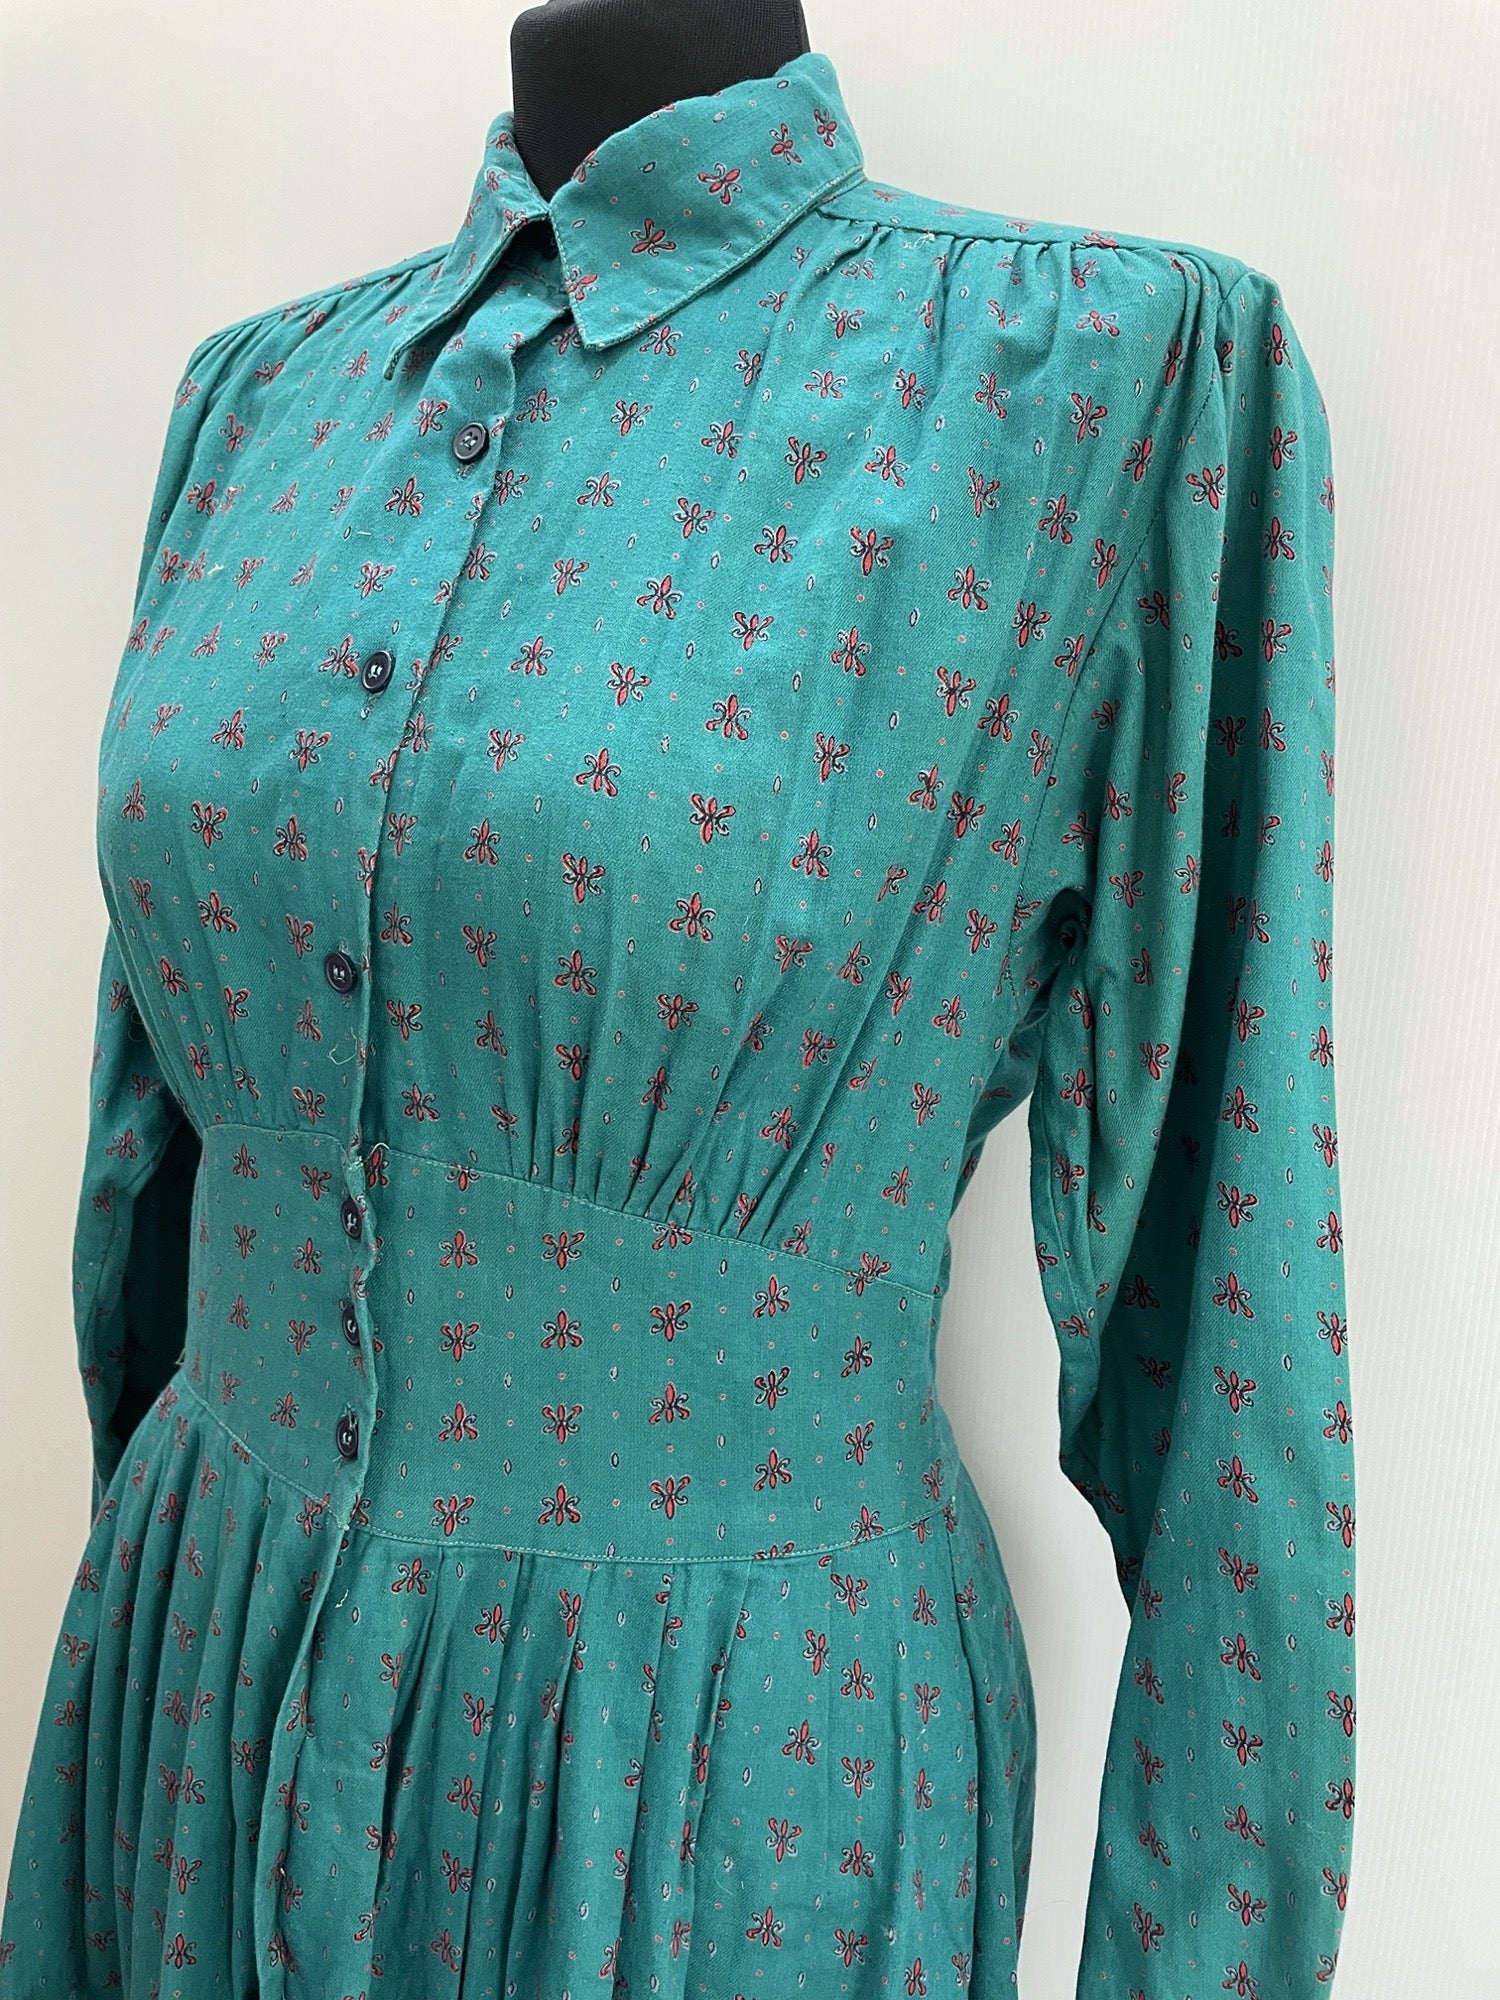 womens  vintage  Urban Village Vintage  urban village  Turquoise  shirt dress  patterned dress  patterned  pattern  Paisley Print  maxi dress  maxi  long sleeves  long sleeved  long sleeve  long length dress  long dress  dresses  dress  collared dress  collared  collar  button up  button front  button fastening  button  boho  big collar  adini  70s  1970s  12